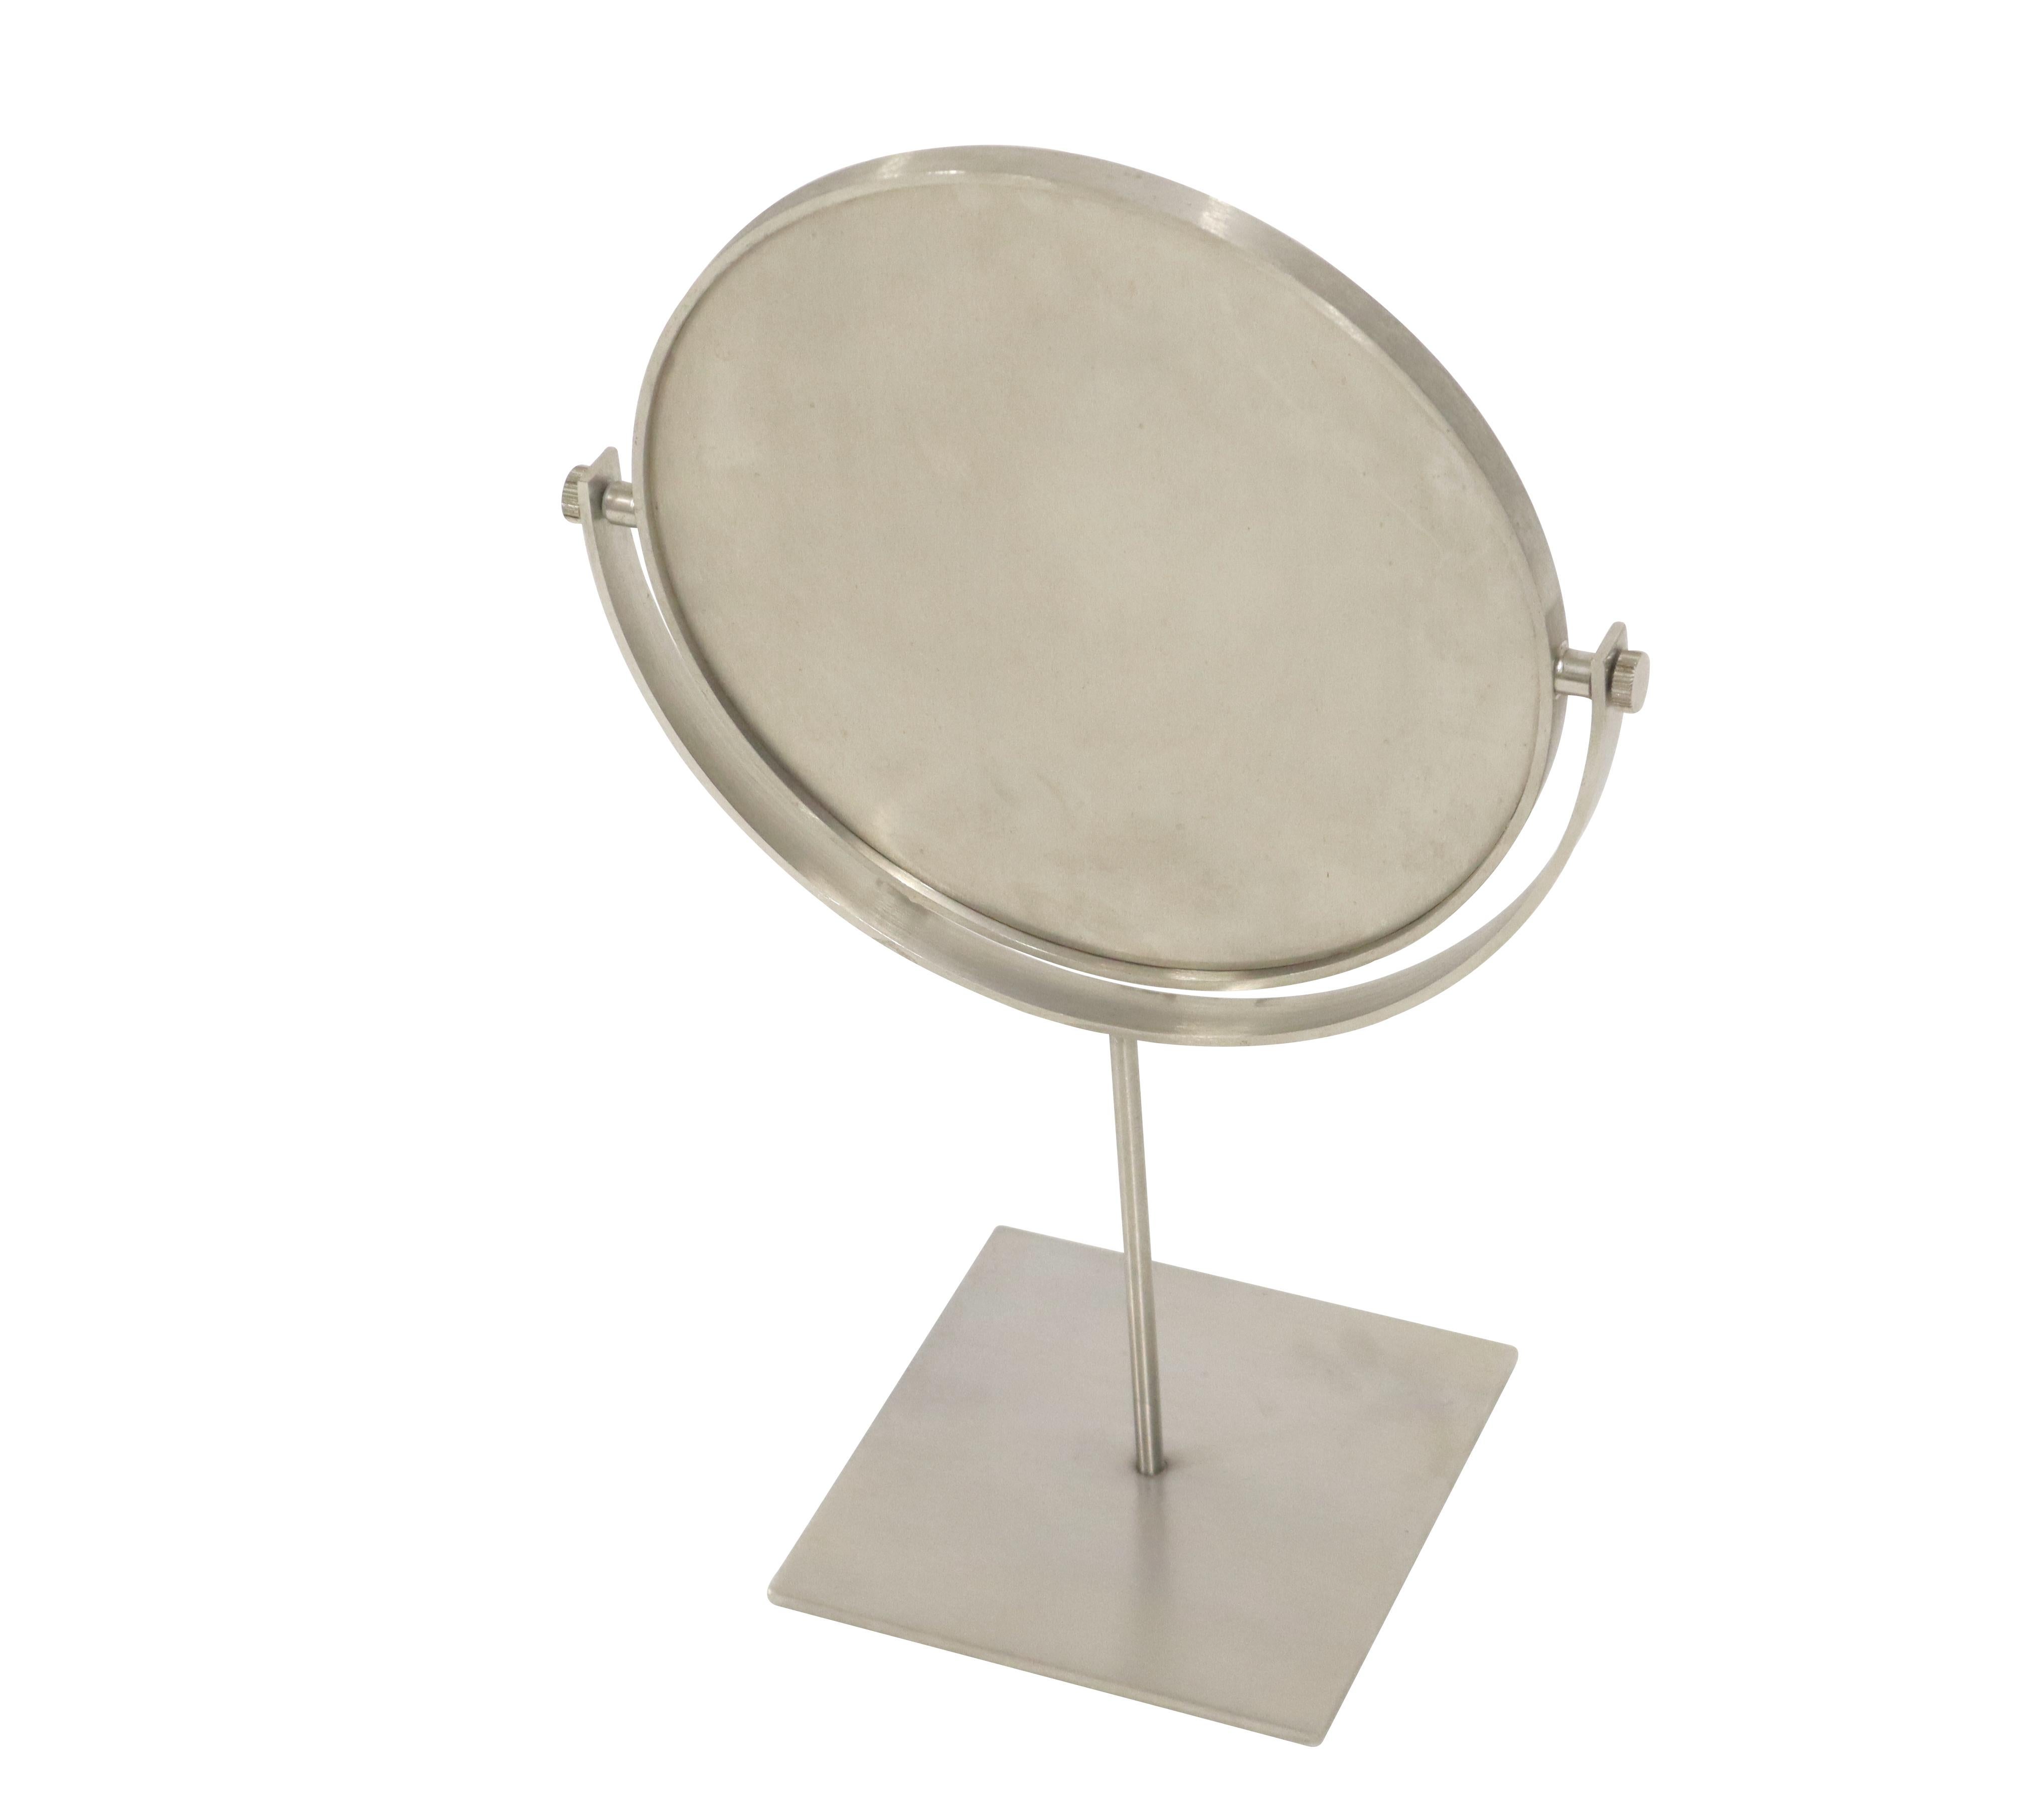 Vanity mirror with brushed stainless steel frame. Tabletop mirror sits in swivel support base. One side is mirror, other side full brushed stainless disc.